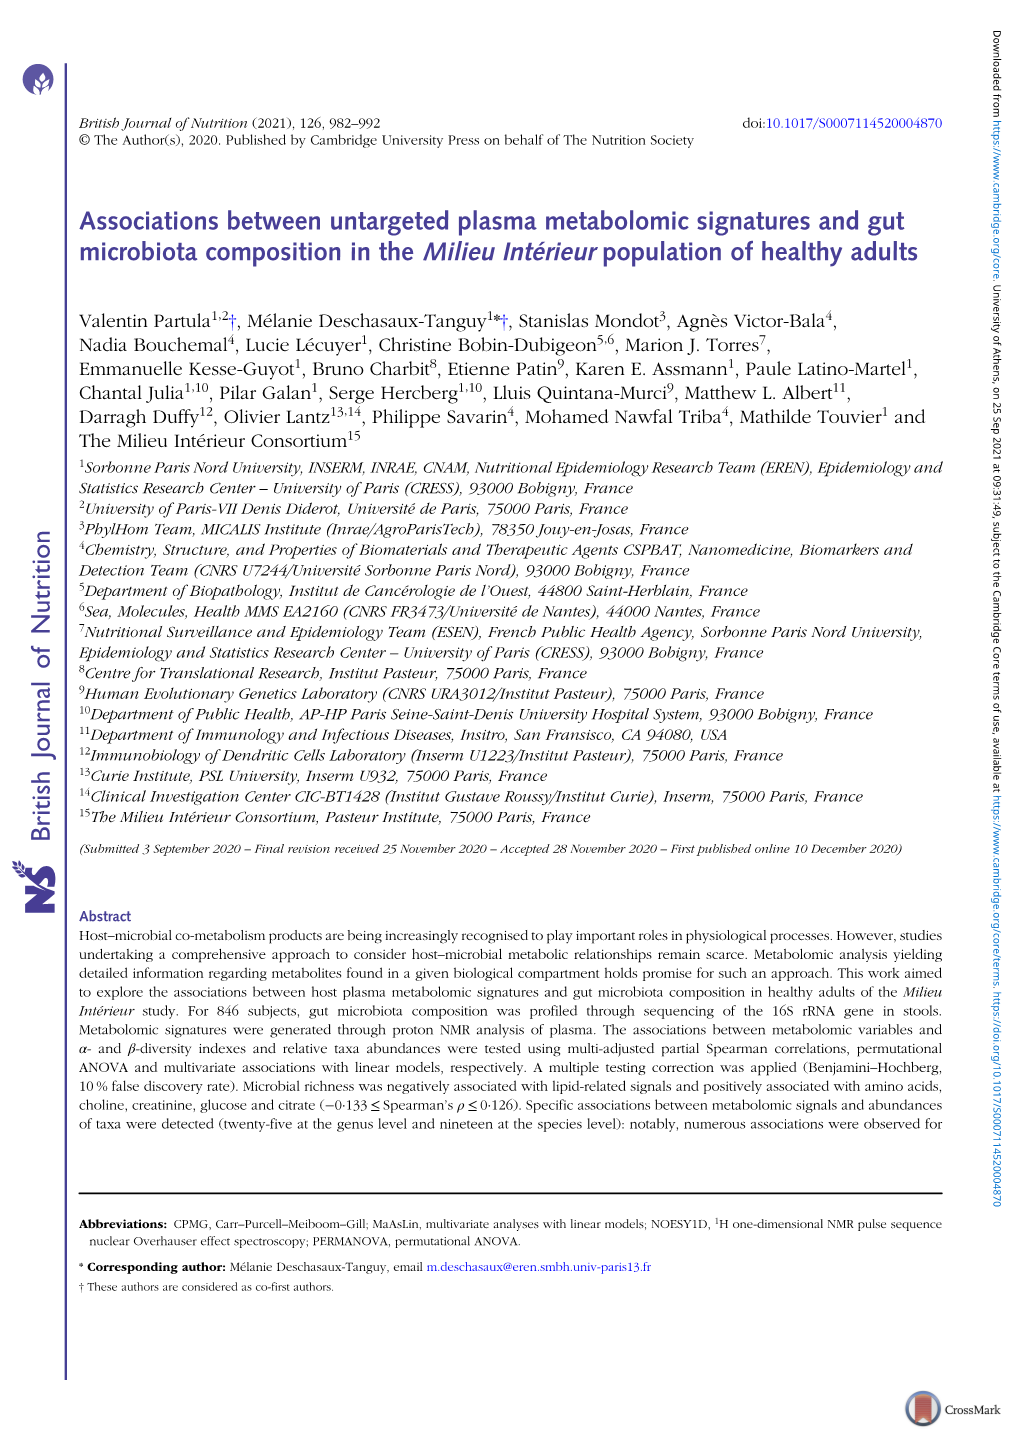 Associations Between Untargeted Plasma Metabolomic Signatures and Gut Microbiota Composition in the Milieu Intérieur Population of Healthy Adults